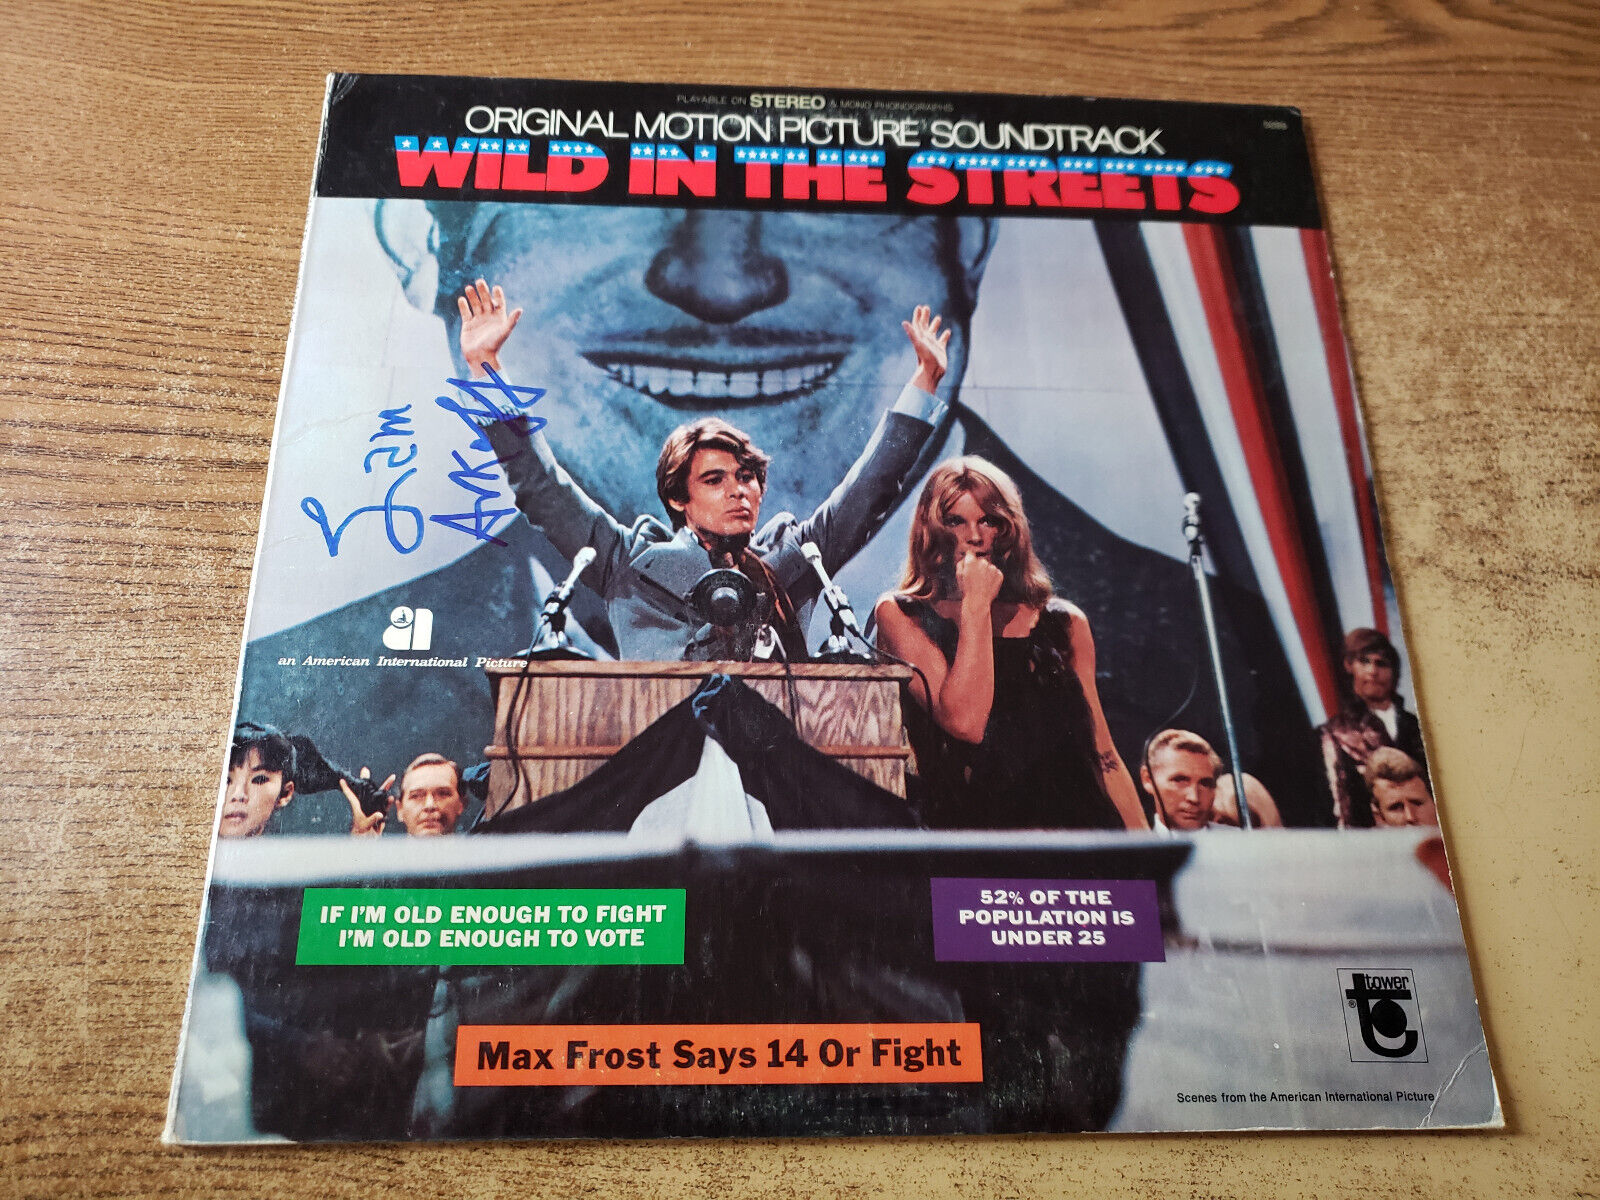 VALID SIGNED SAMUEL ARKOFF 1960s VG++ Wild In The Streets SOUNDTRACK 5099 LP33